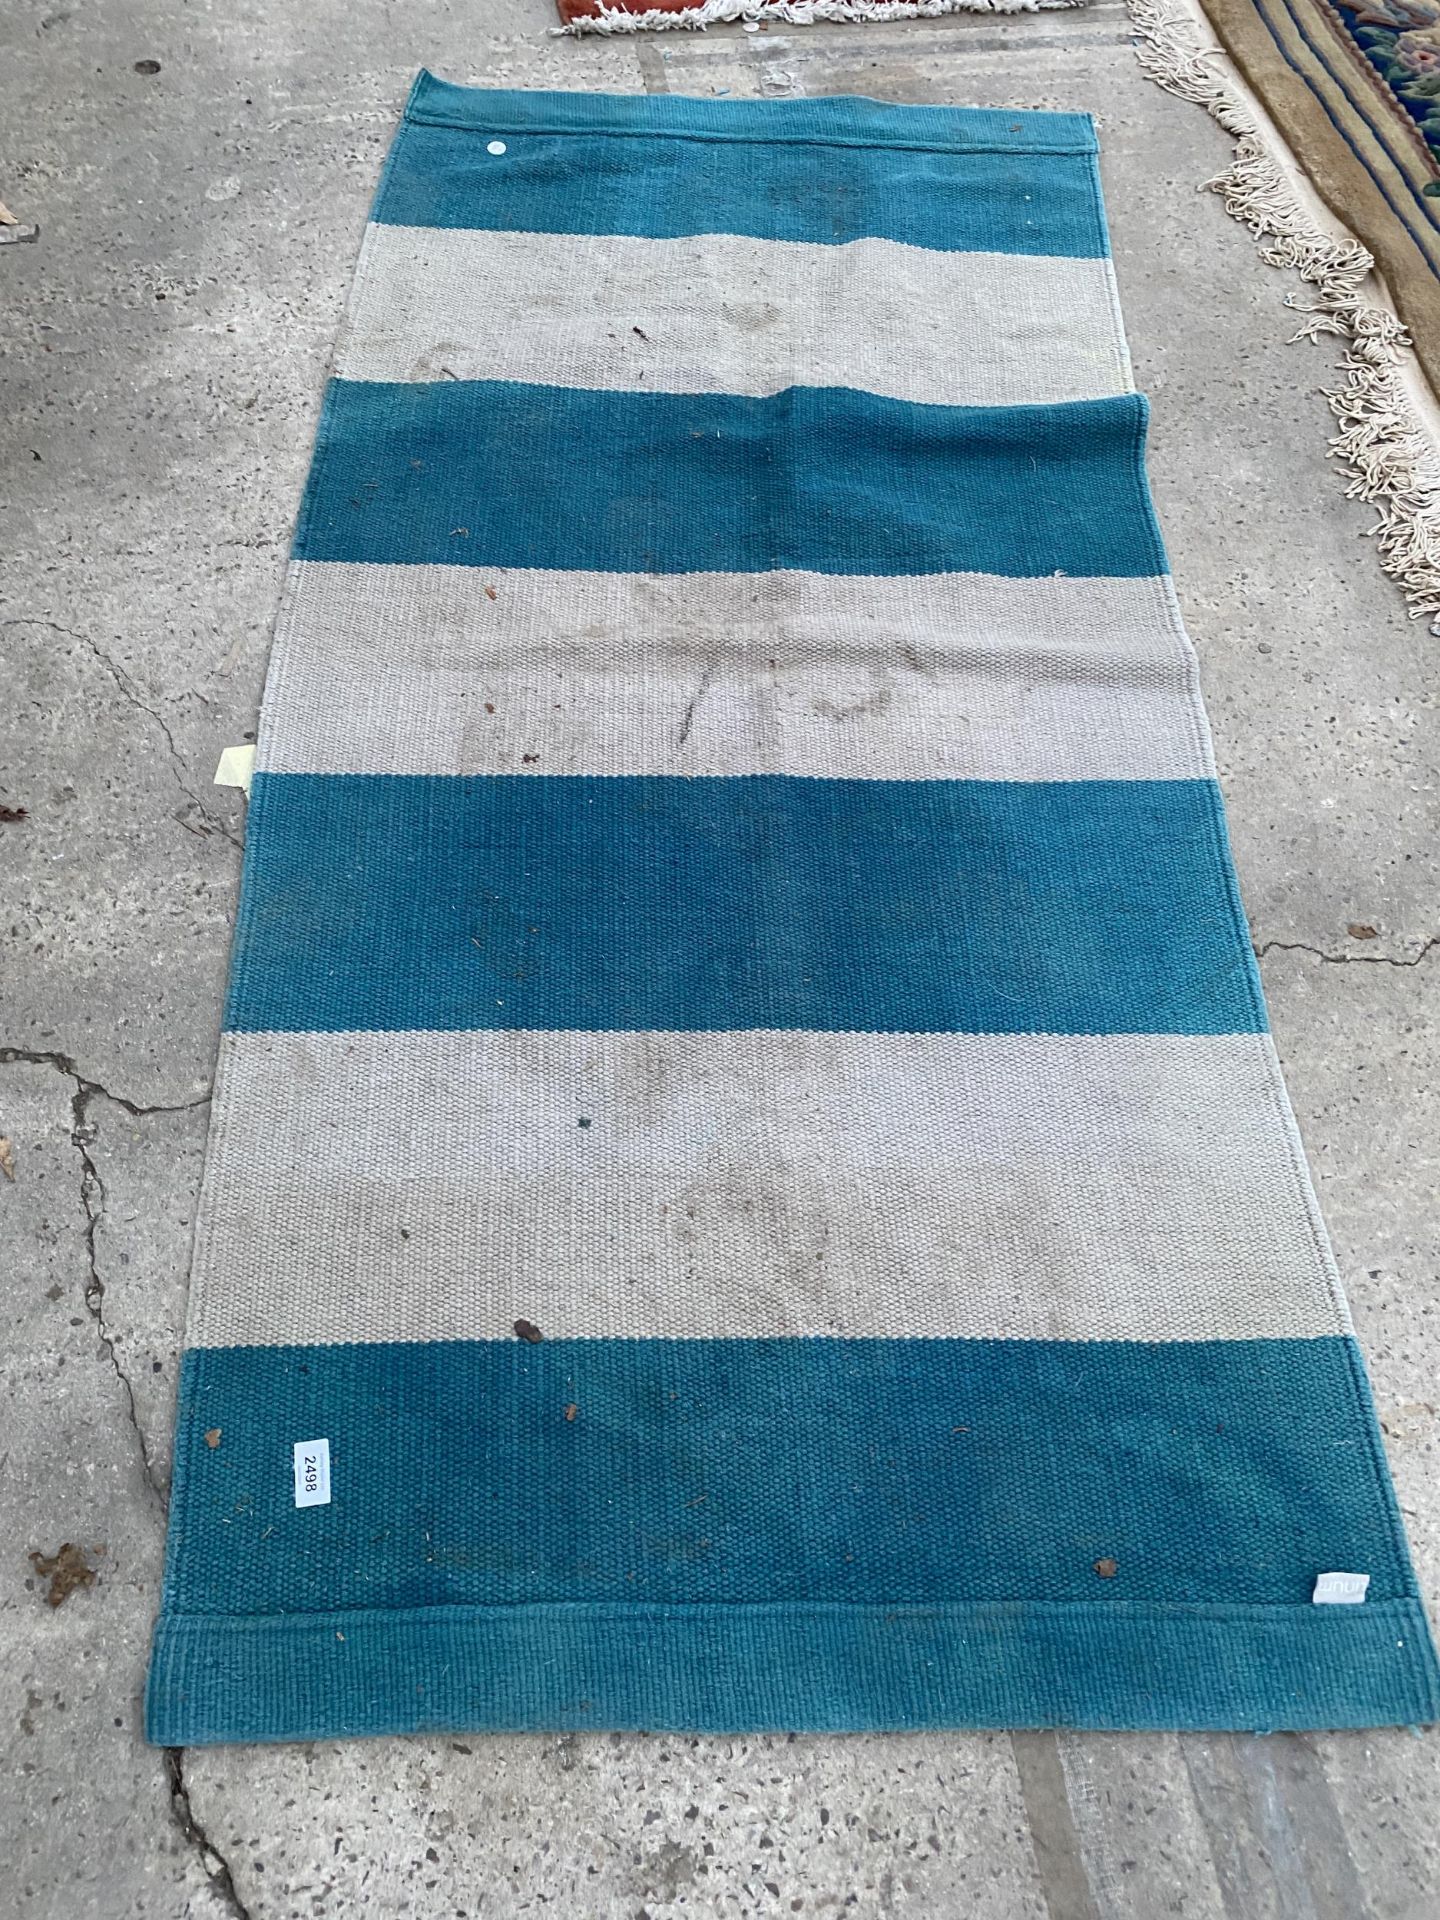 A SMALL BLUE AND BEIGE CARPET RUNNER